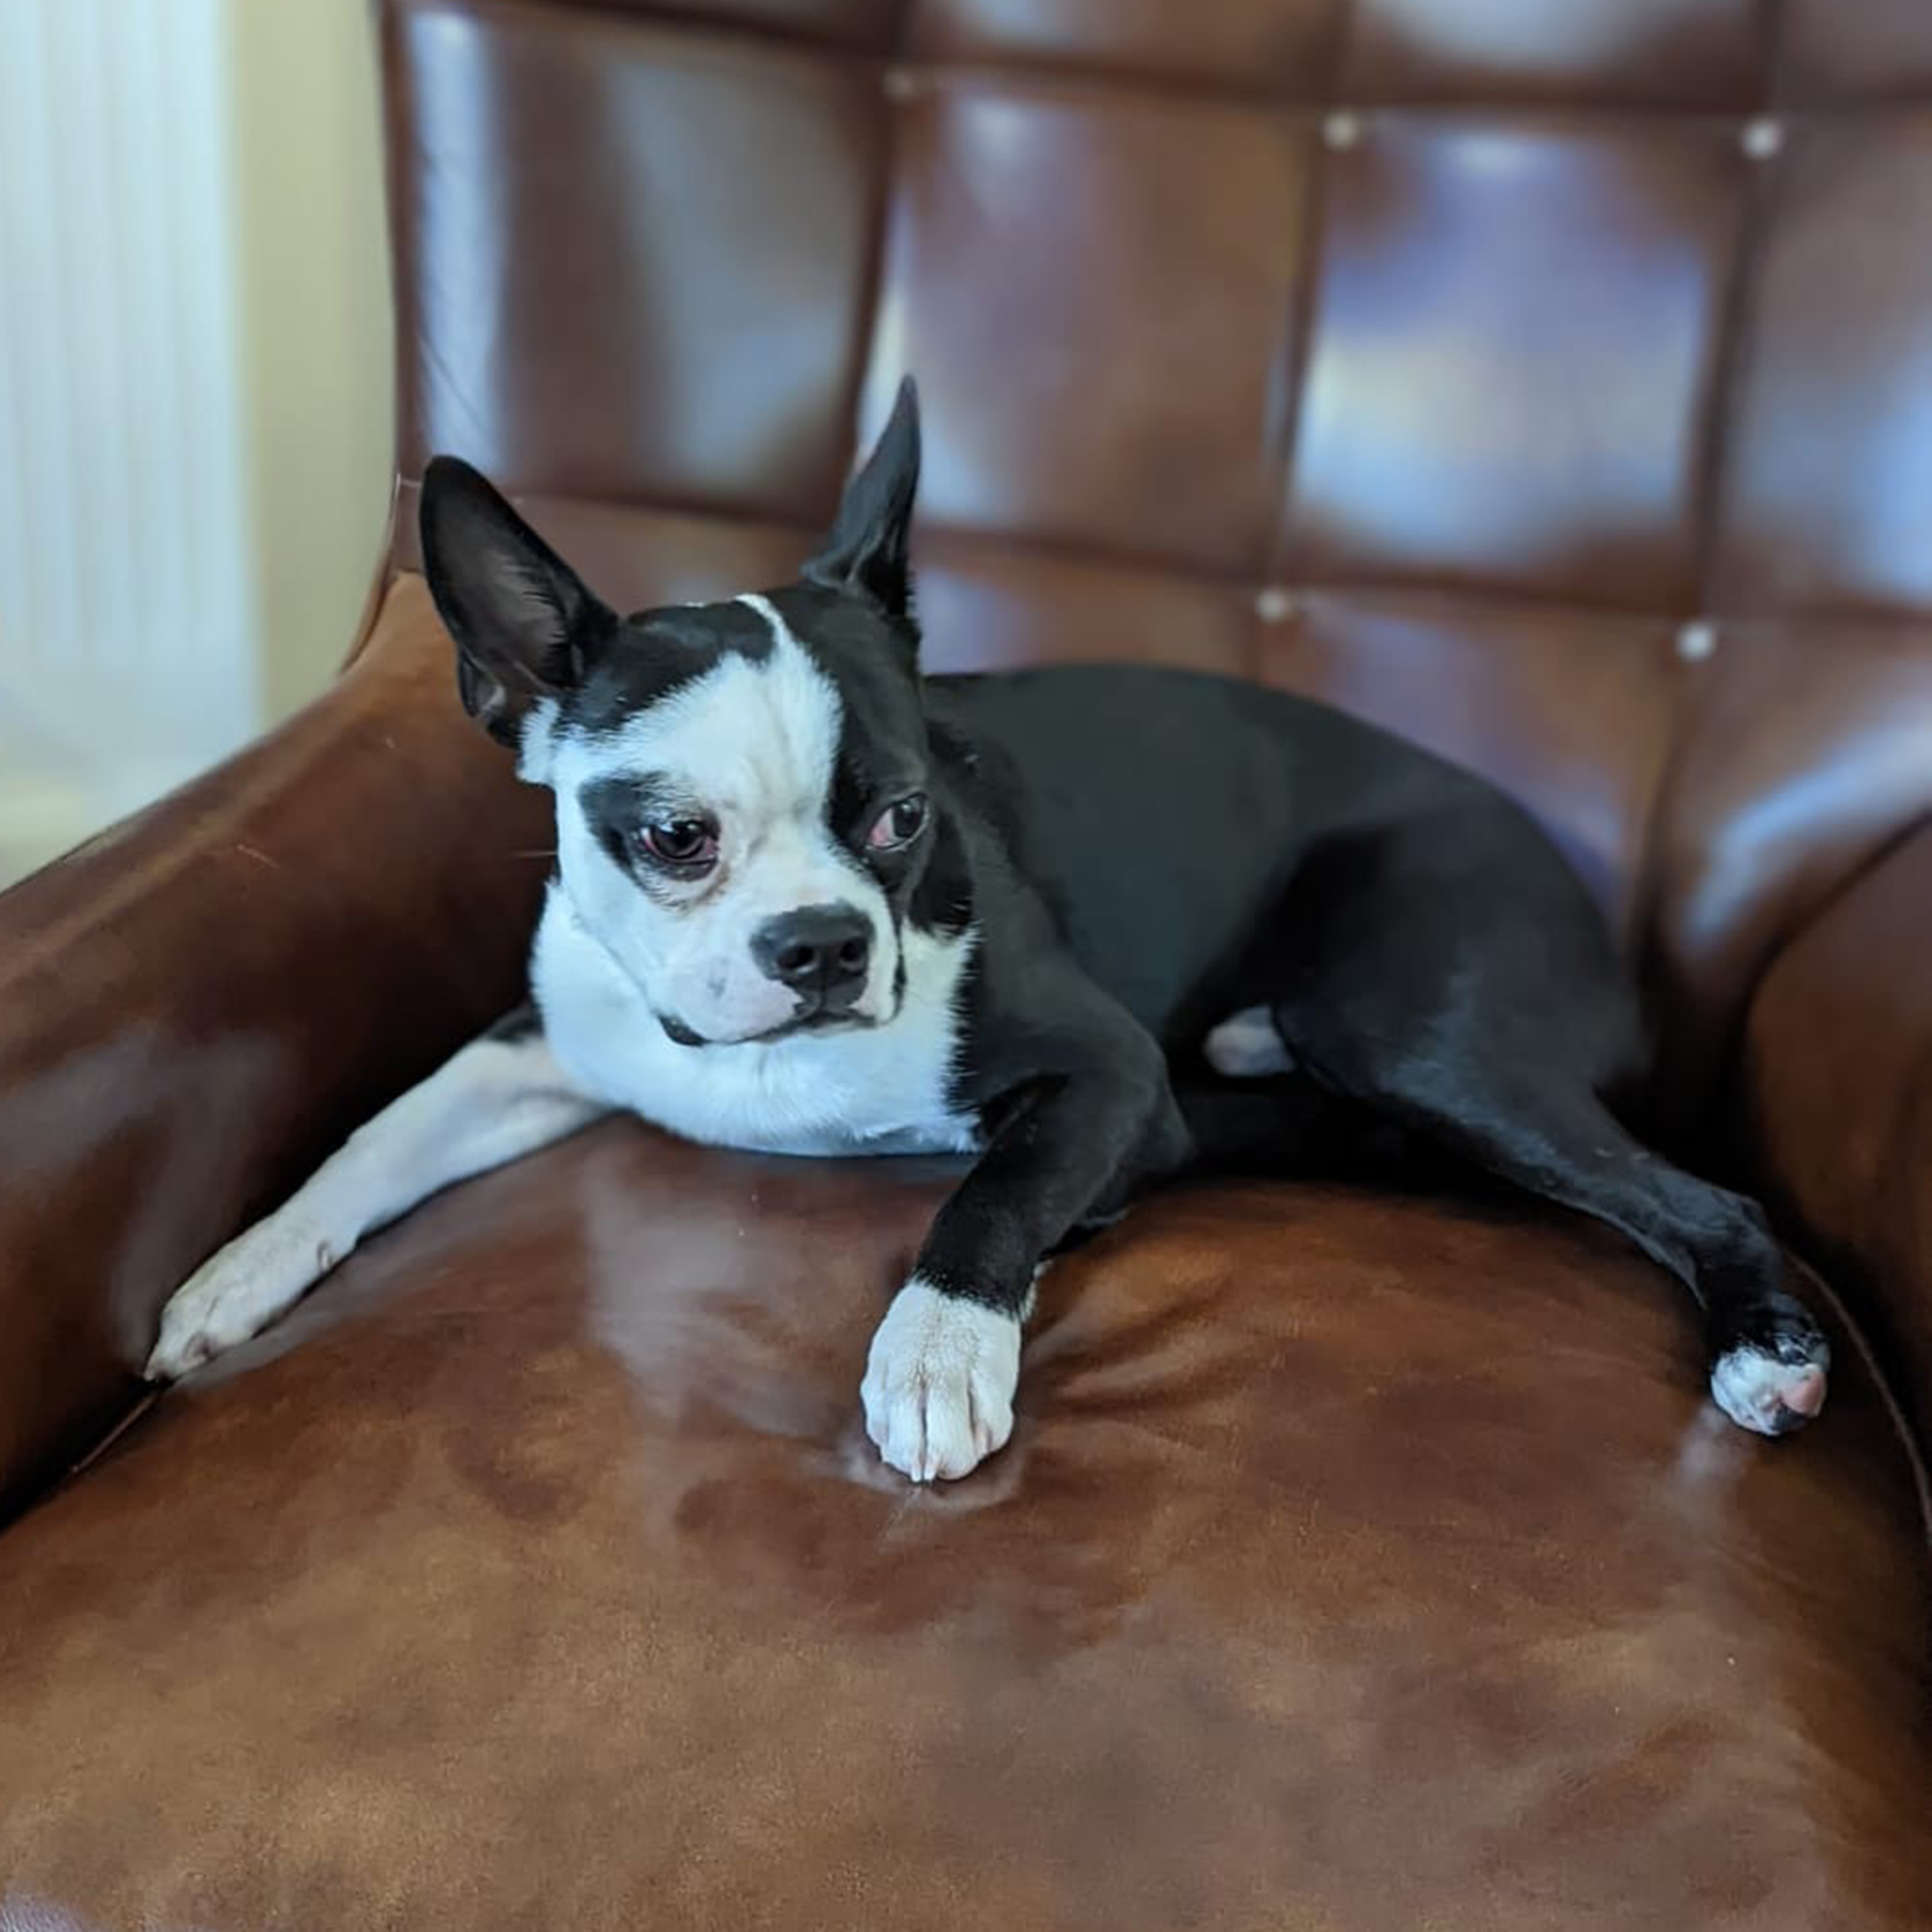 A dog named Charlie sitting on a leather chair